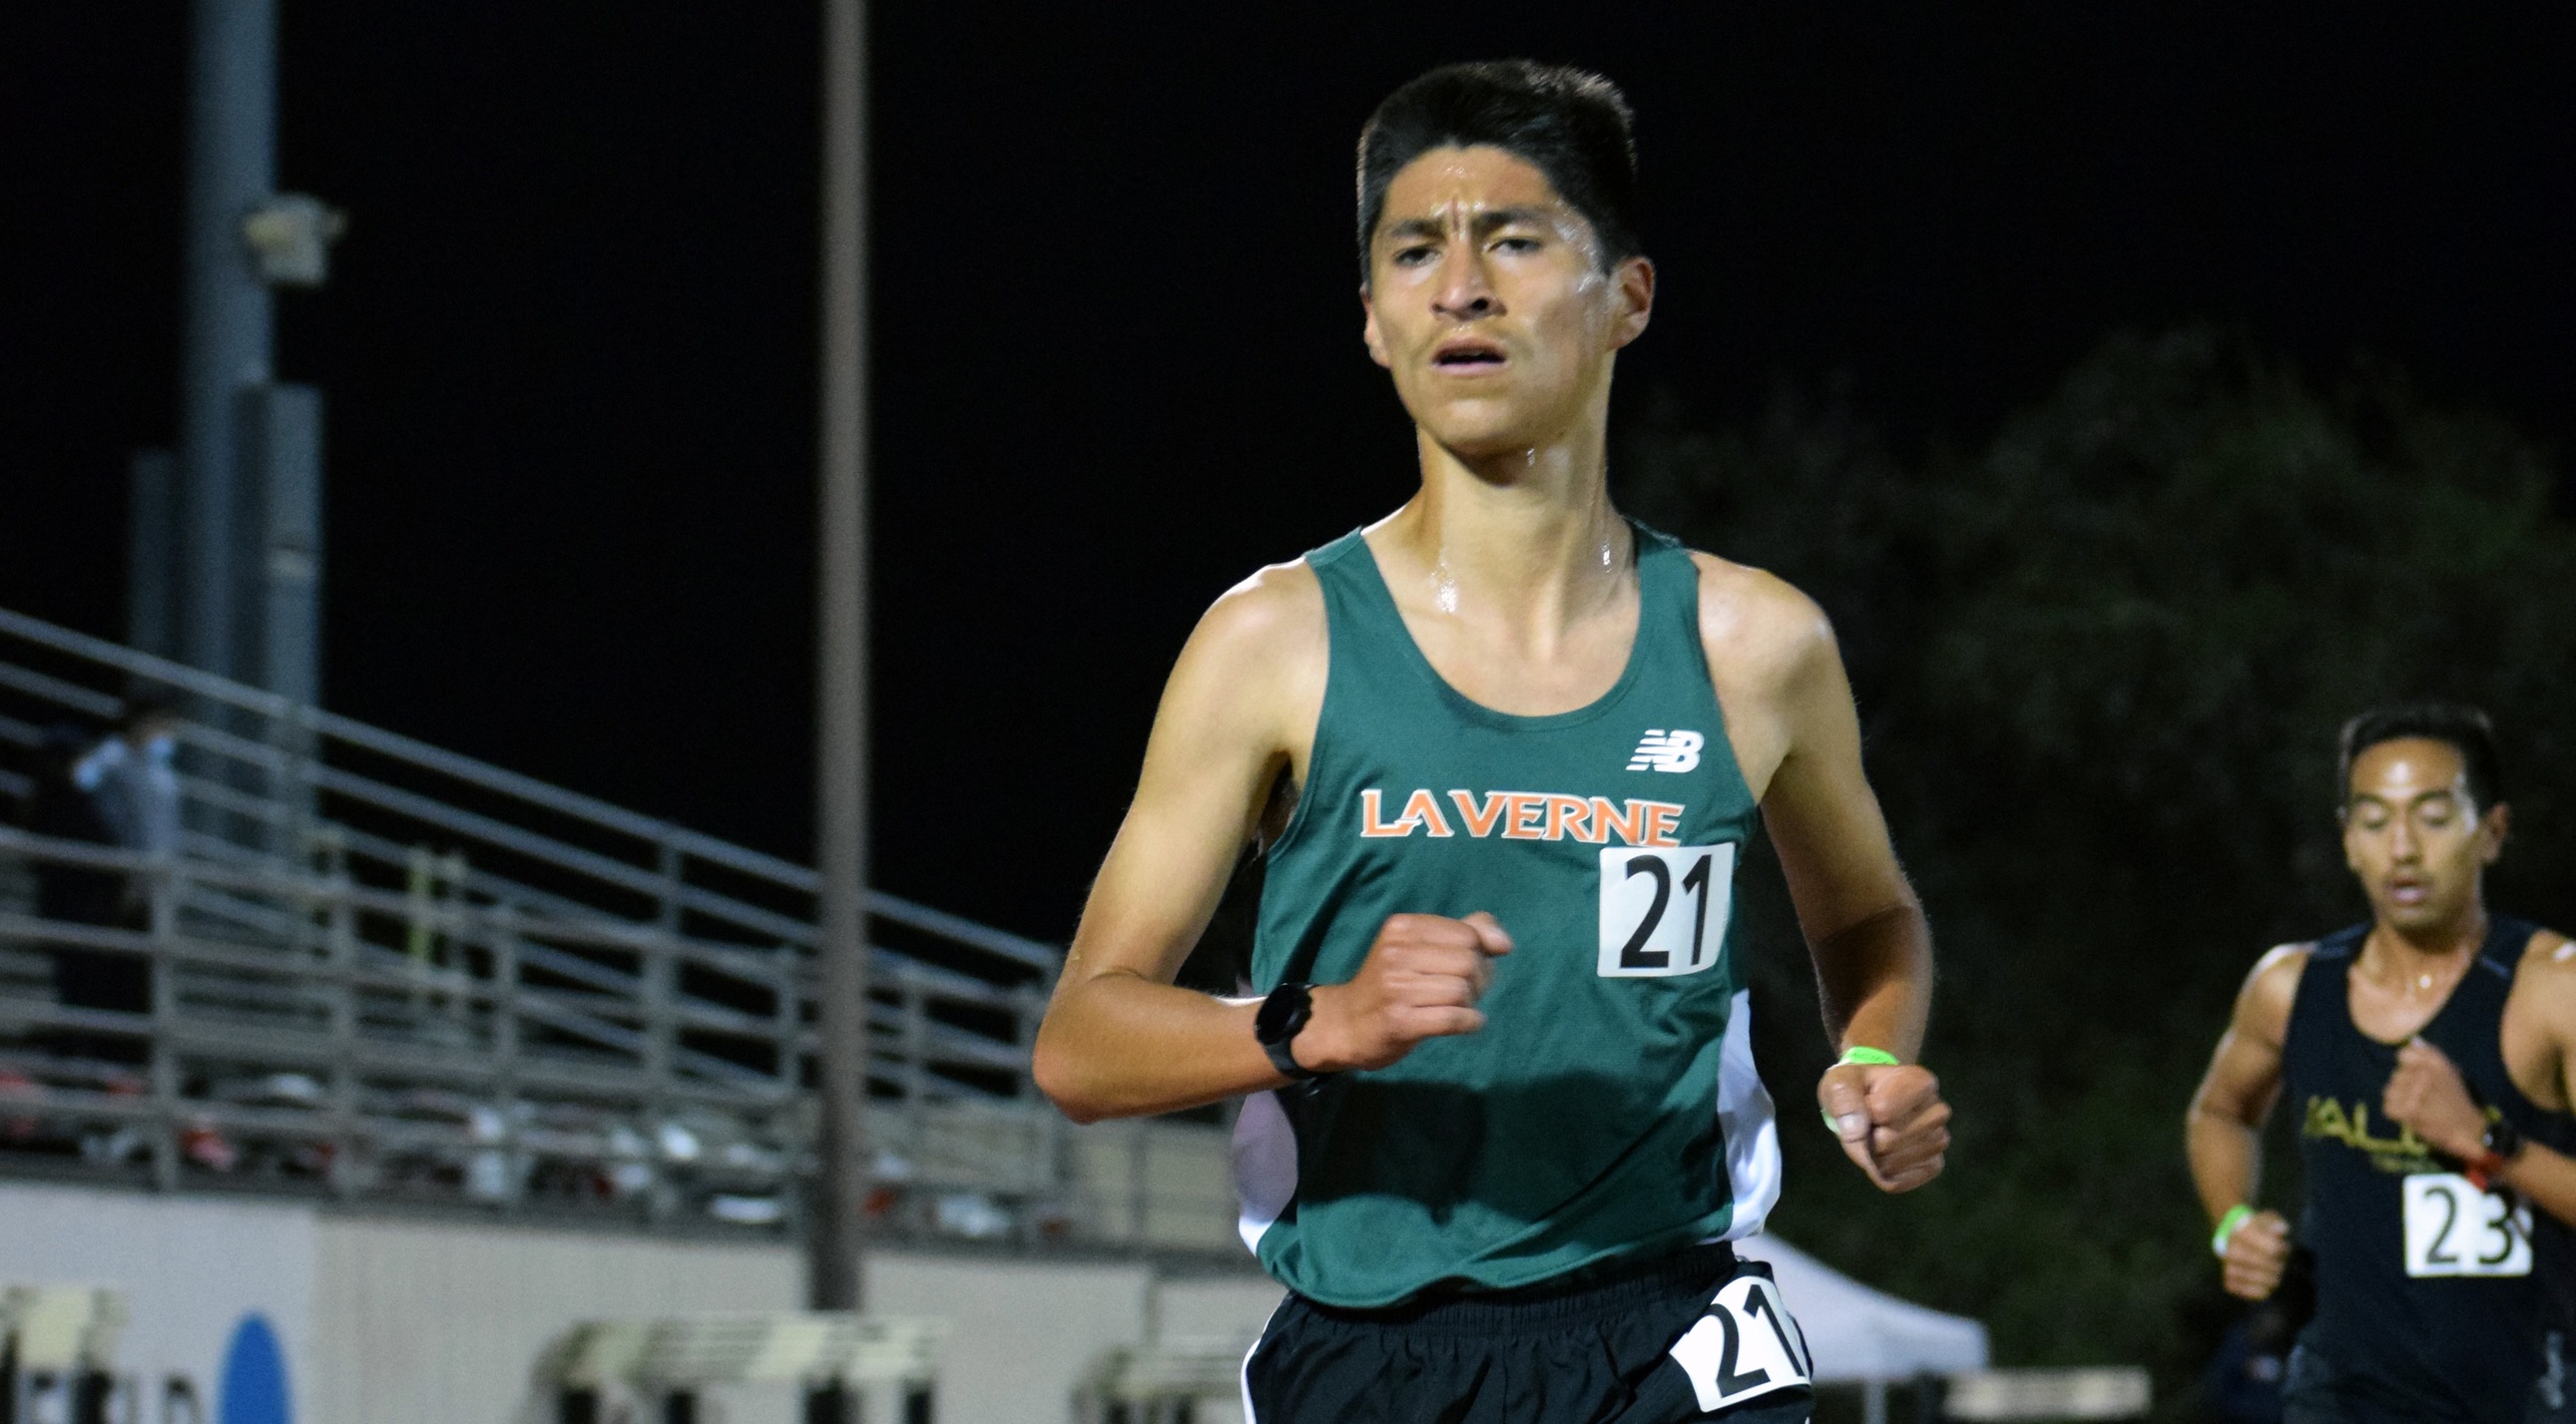 Track and Field Competes at APU